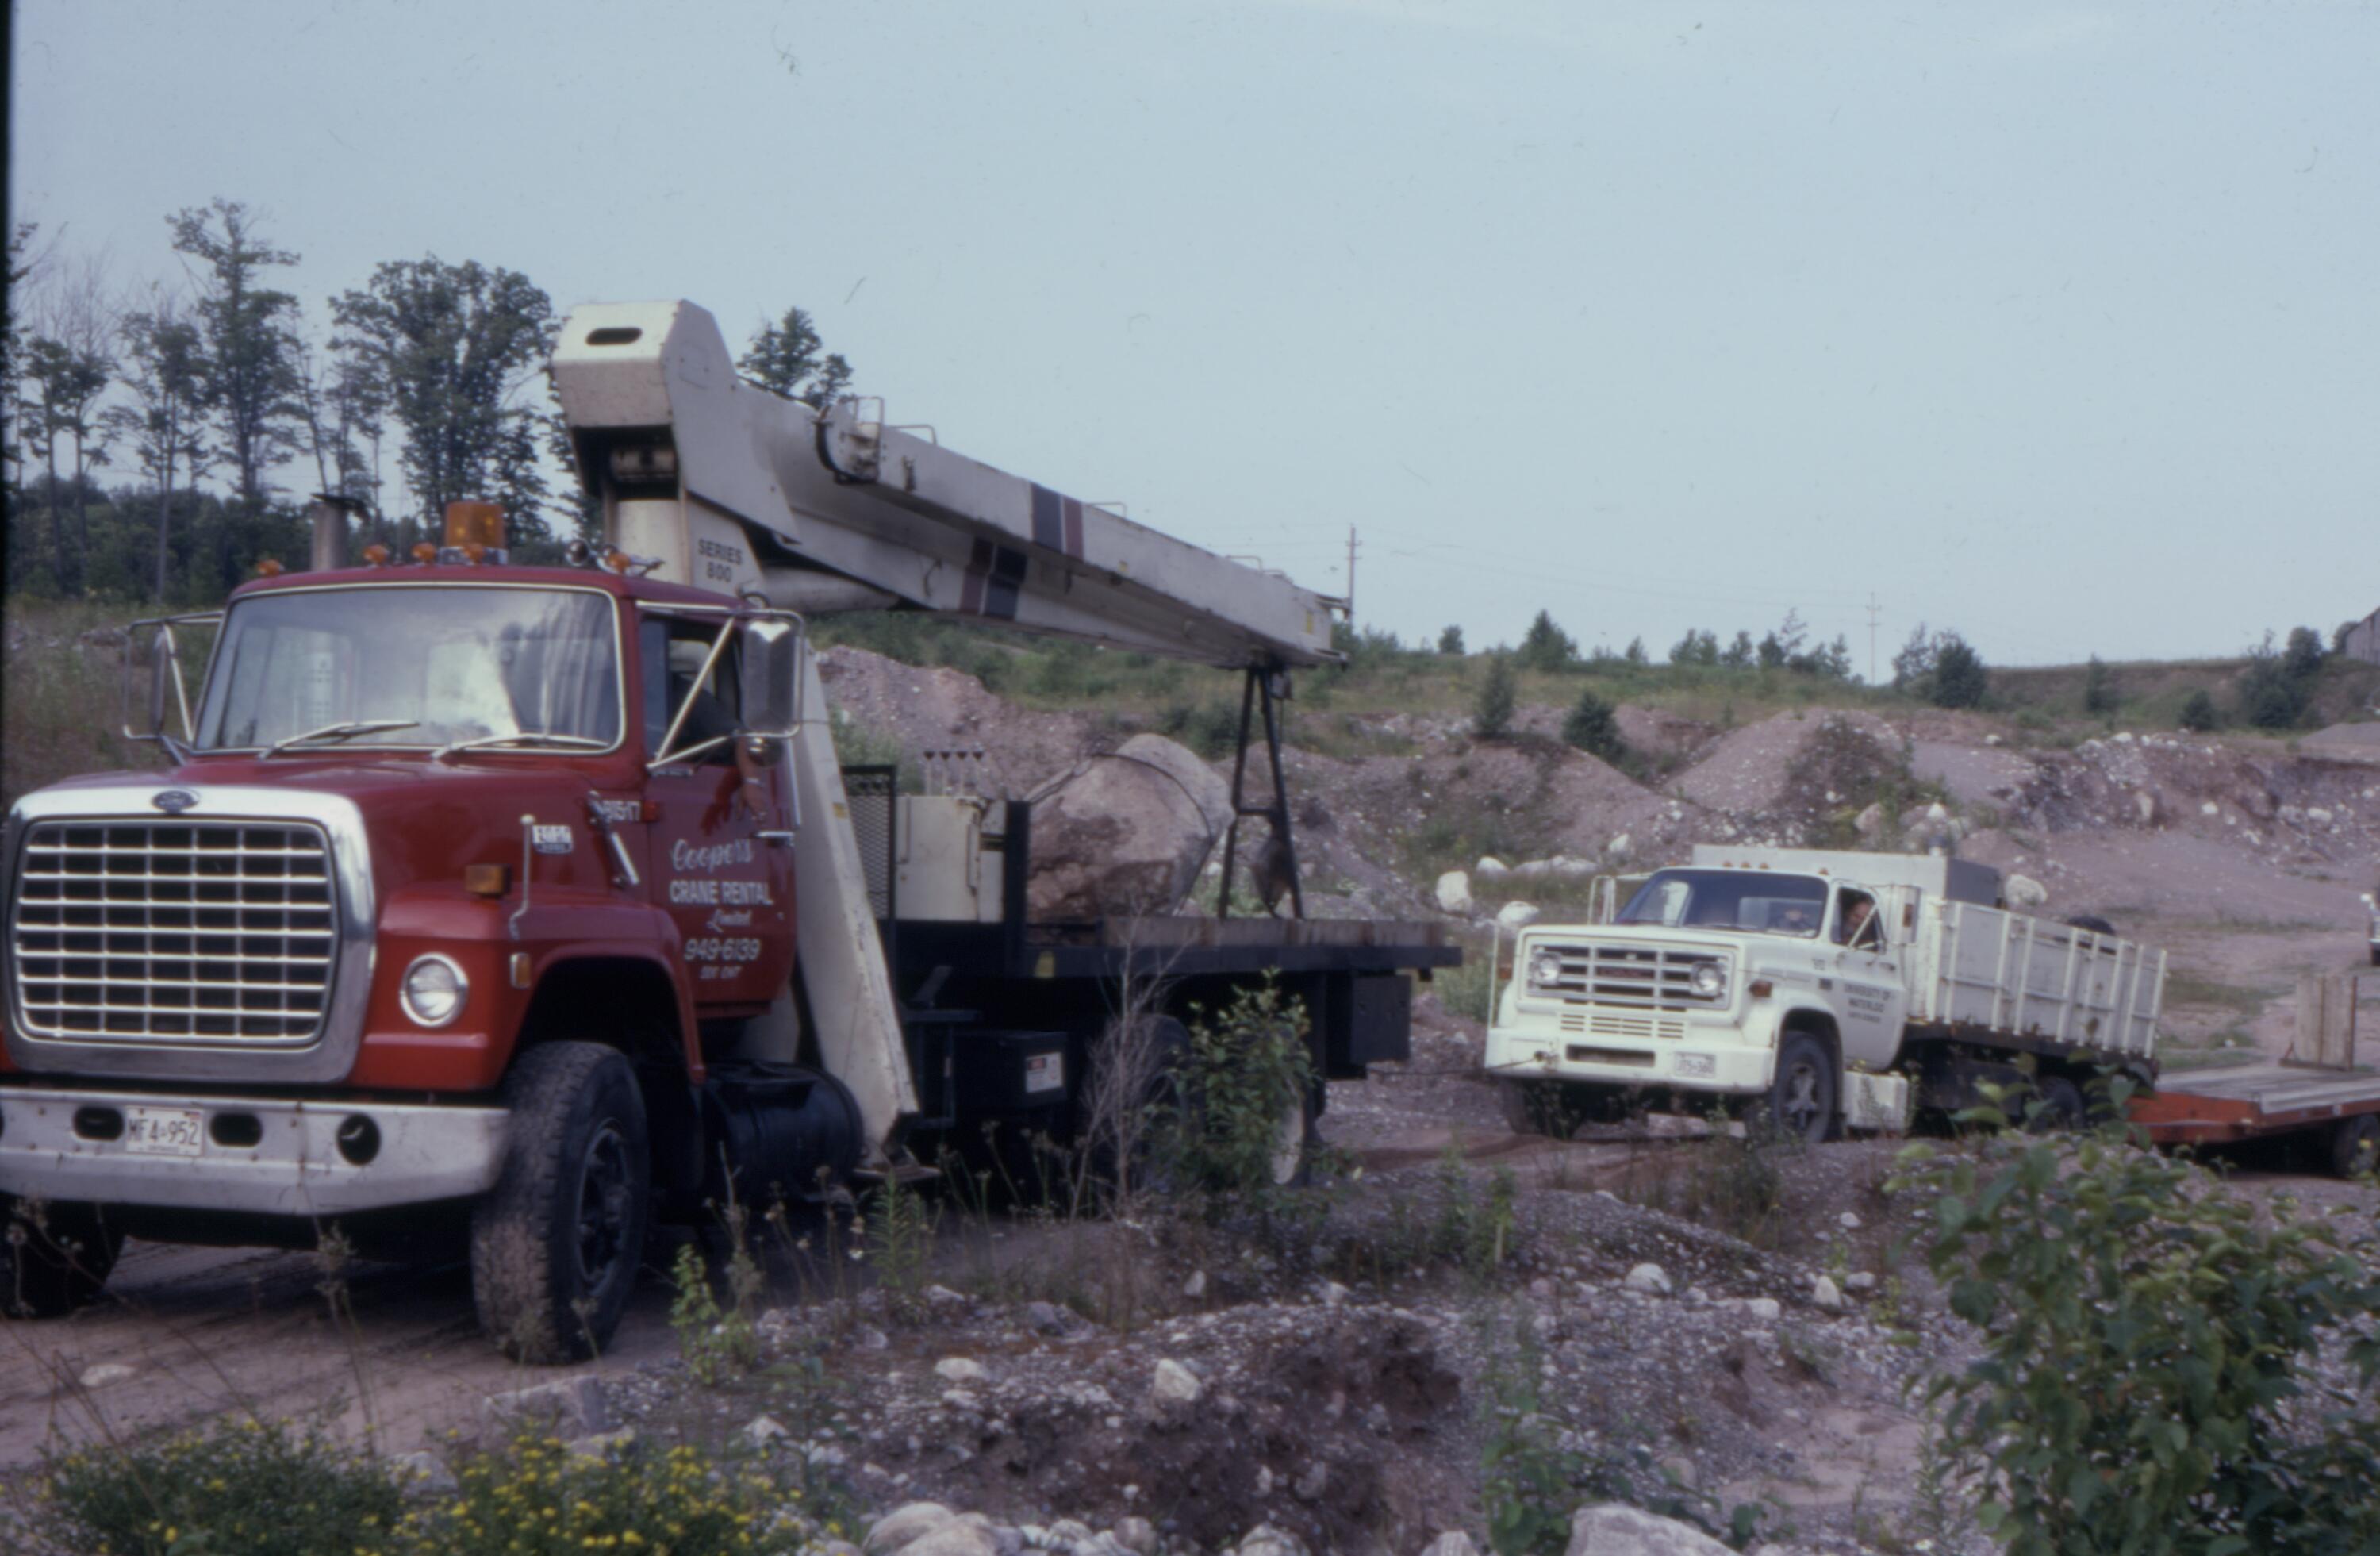 A truck helping another truck get out of the soft sand in a quarry pit.